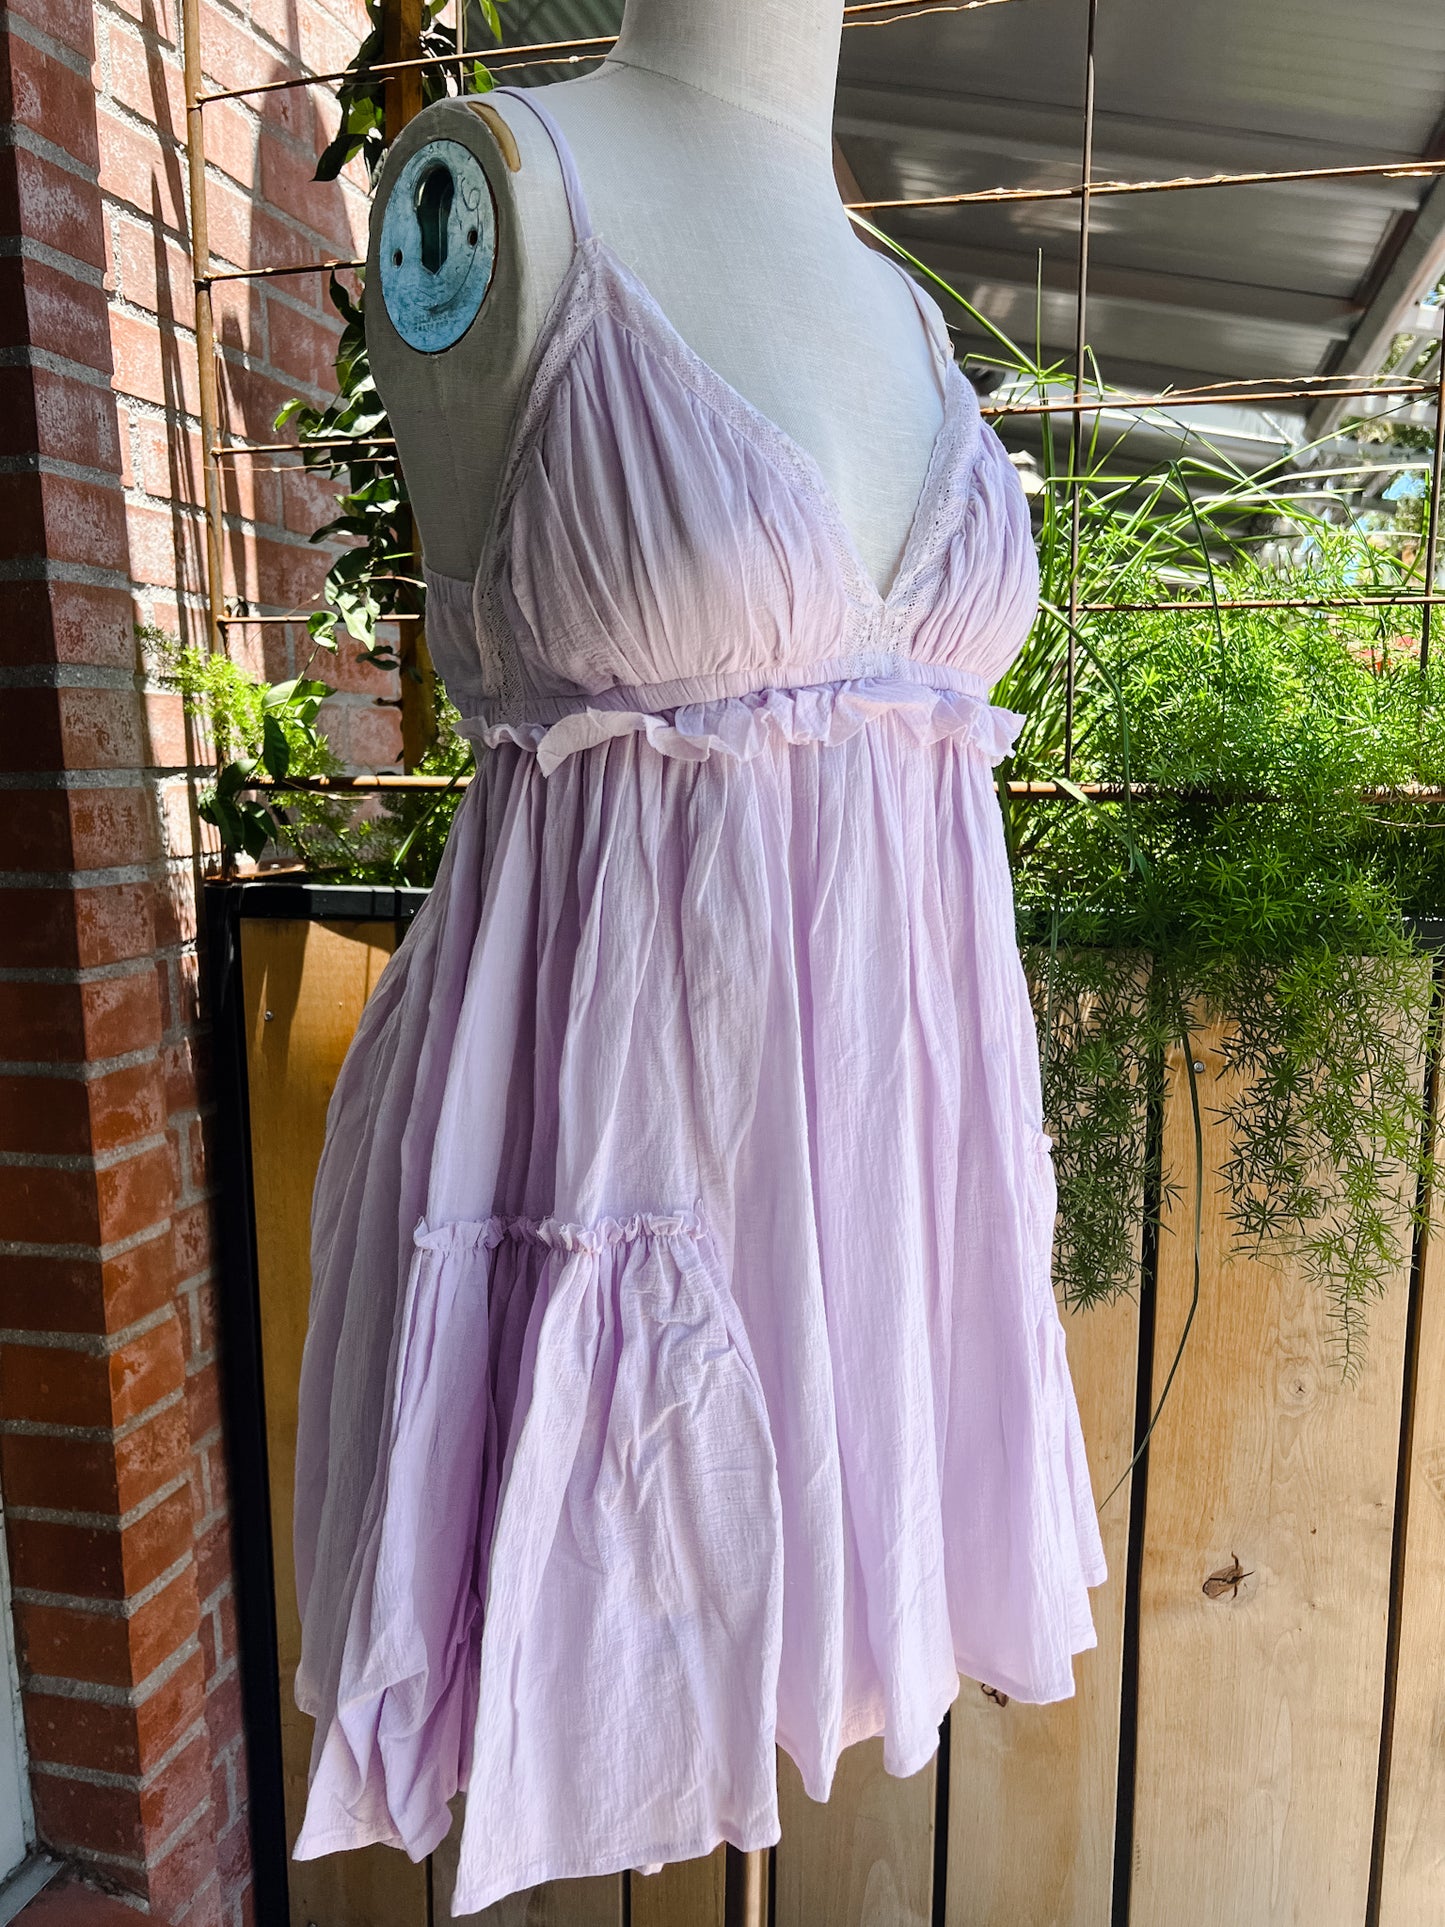 About Time Baby Doll Mini Dress - Lavender